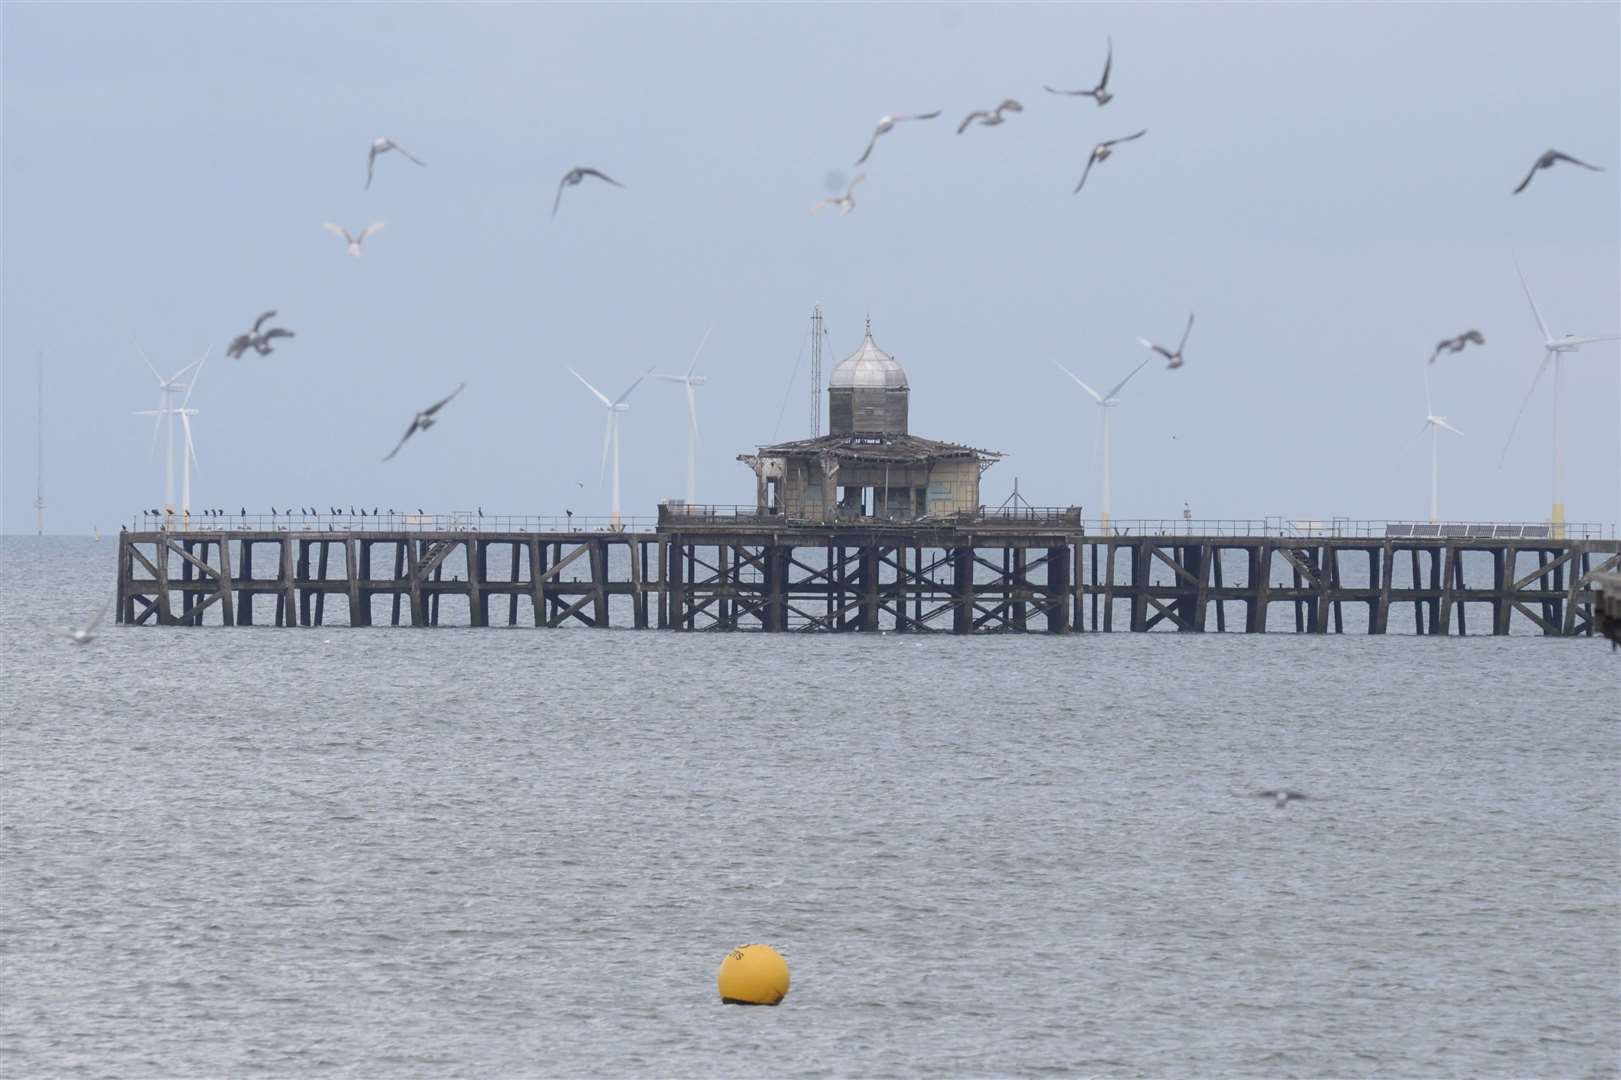 The old Herne Bay pier head